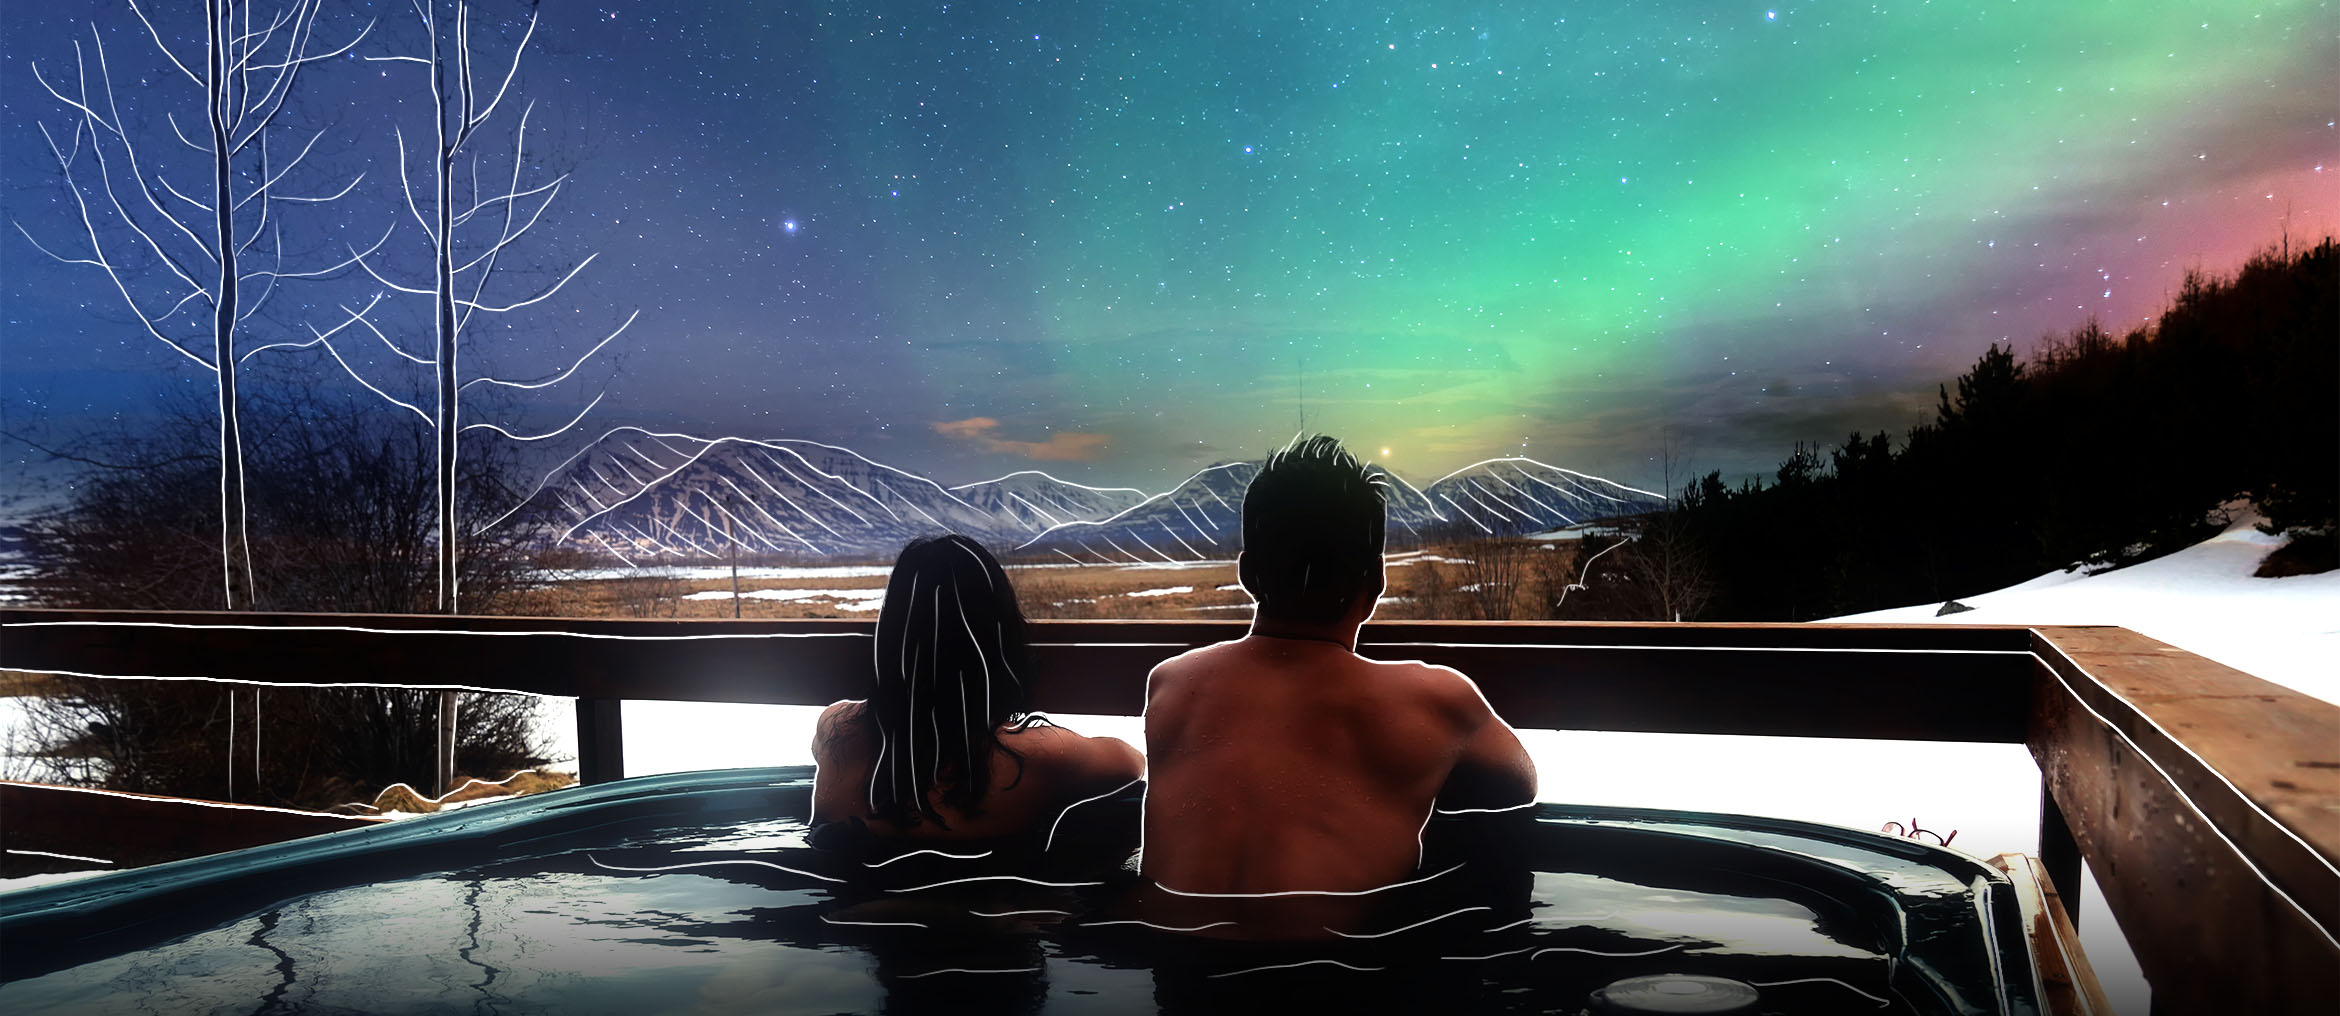 7 Signs Your Relationship Is Written In The Stars Seeking Blog